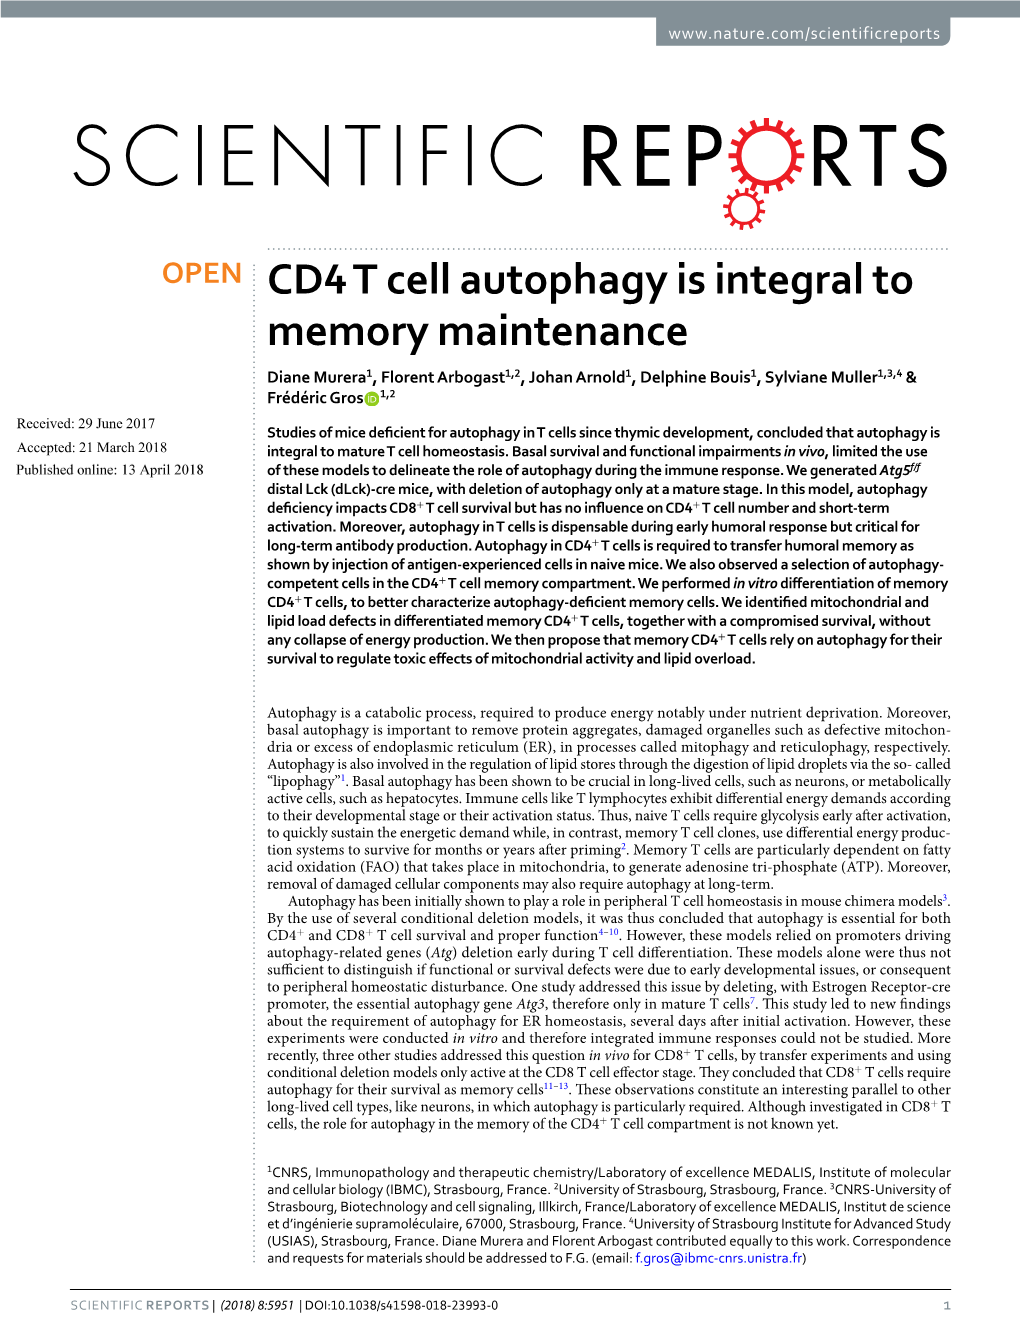 CD4 T Cell Autophagy Is Integral to Memory Maintenance